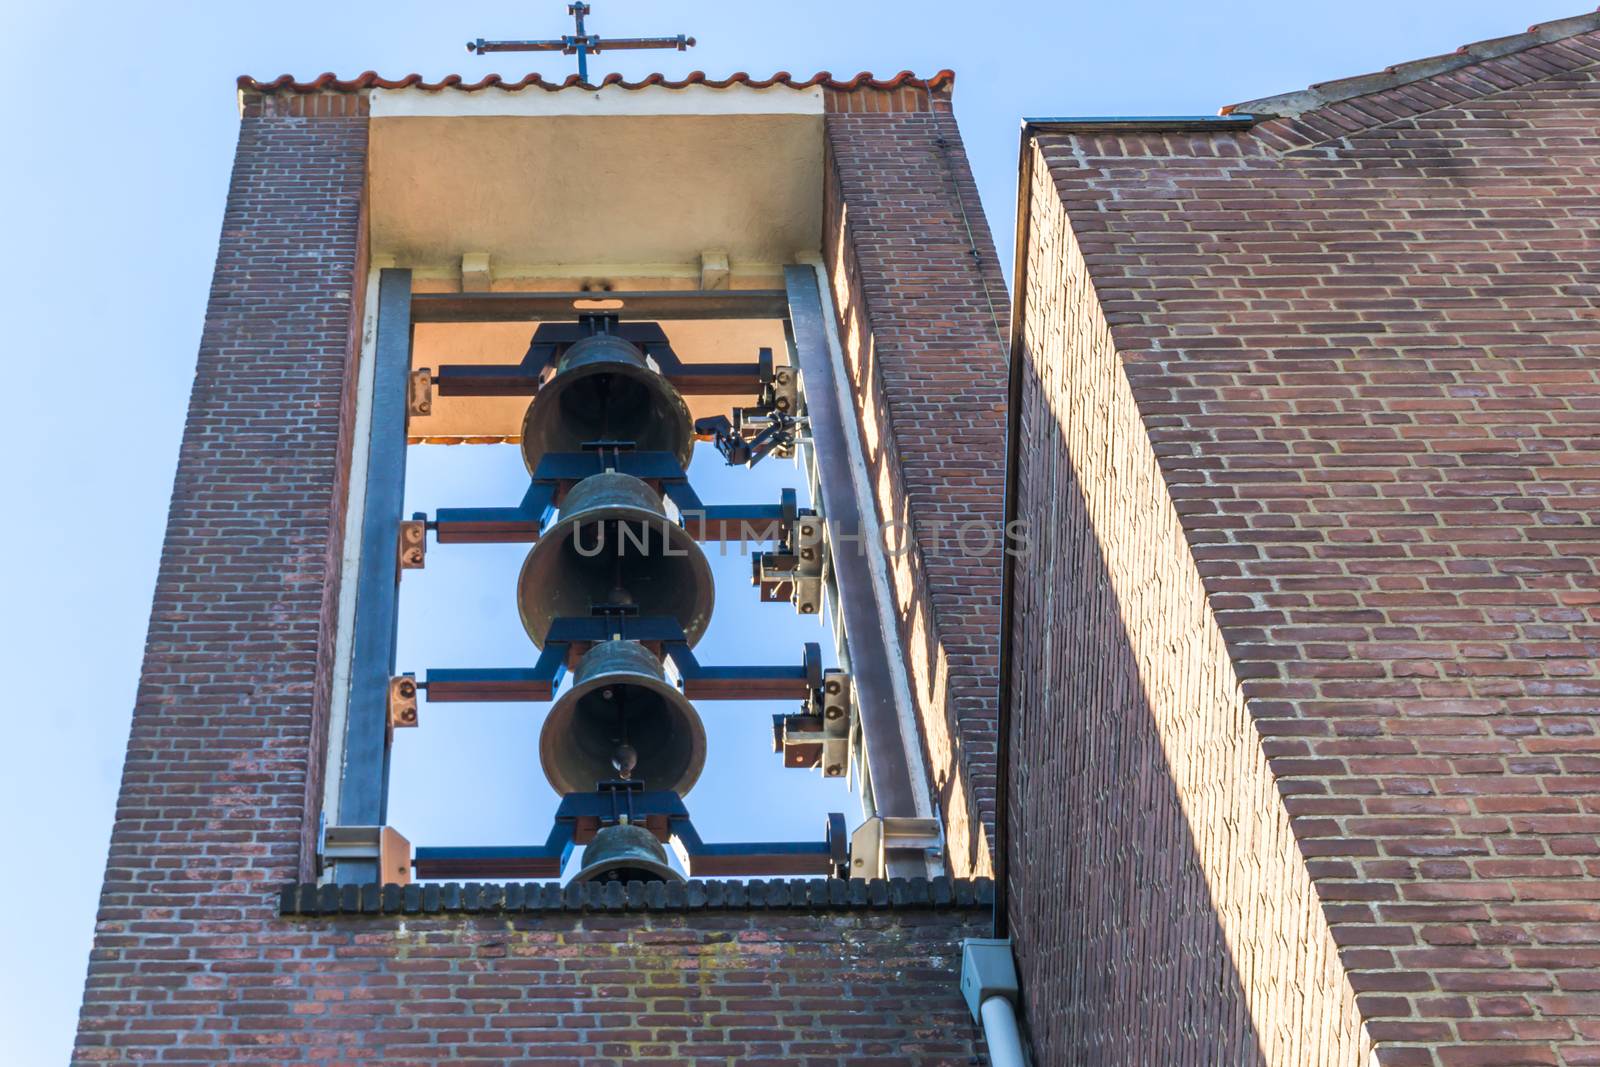 group of church bells hanging in a church tower for ringing by charlottebleijenberg